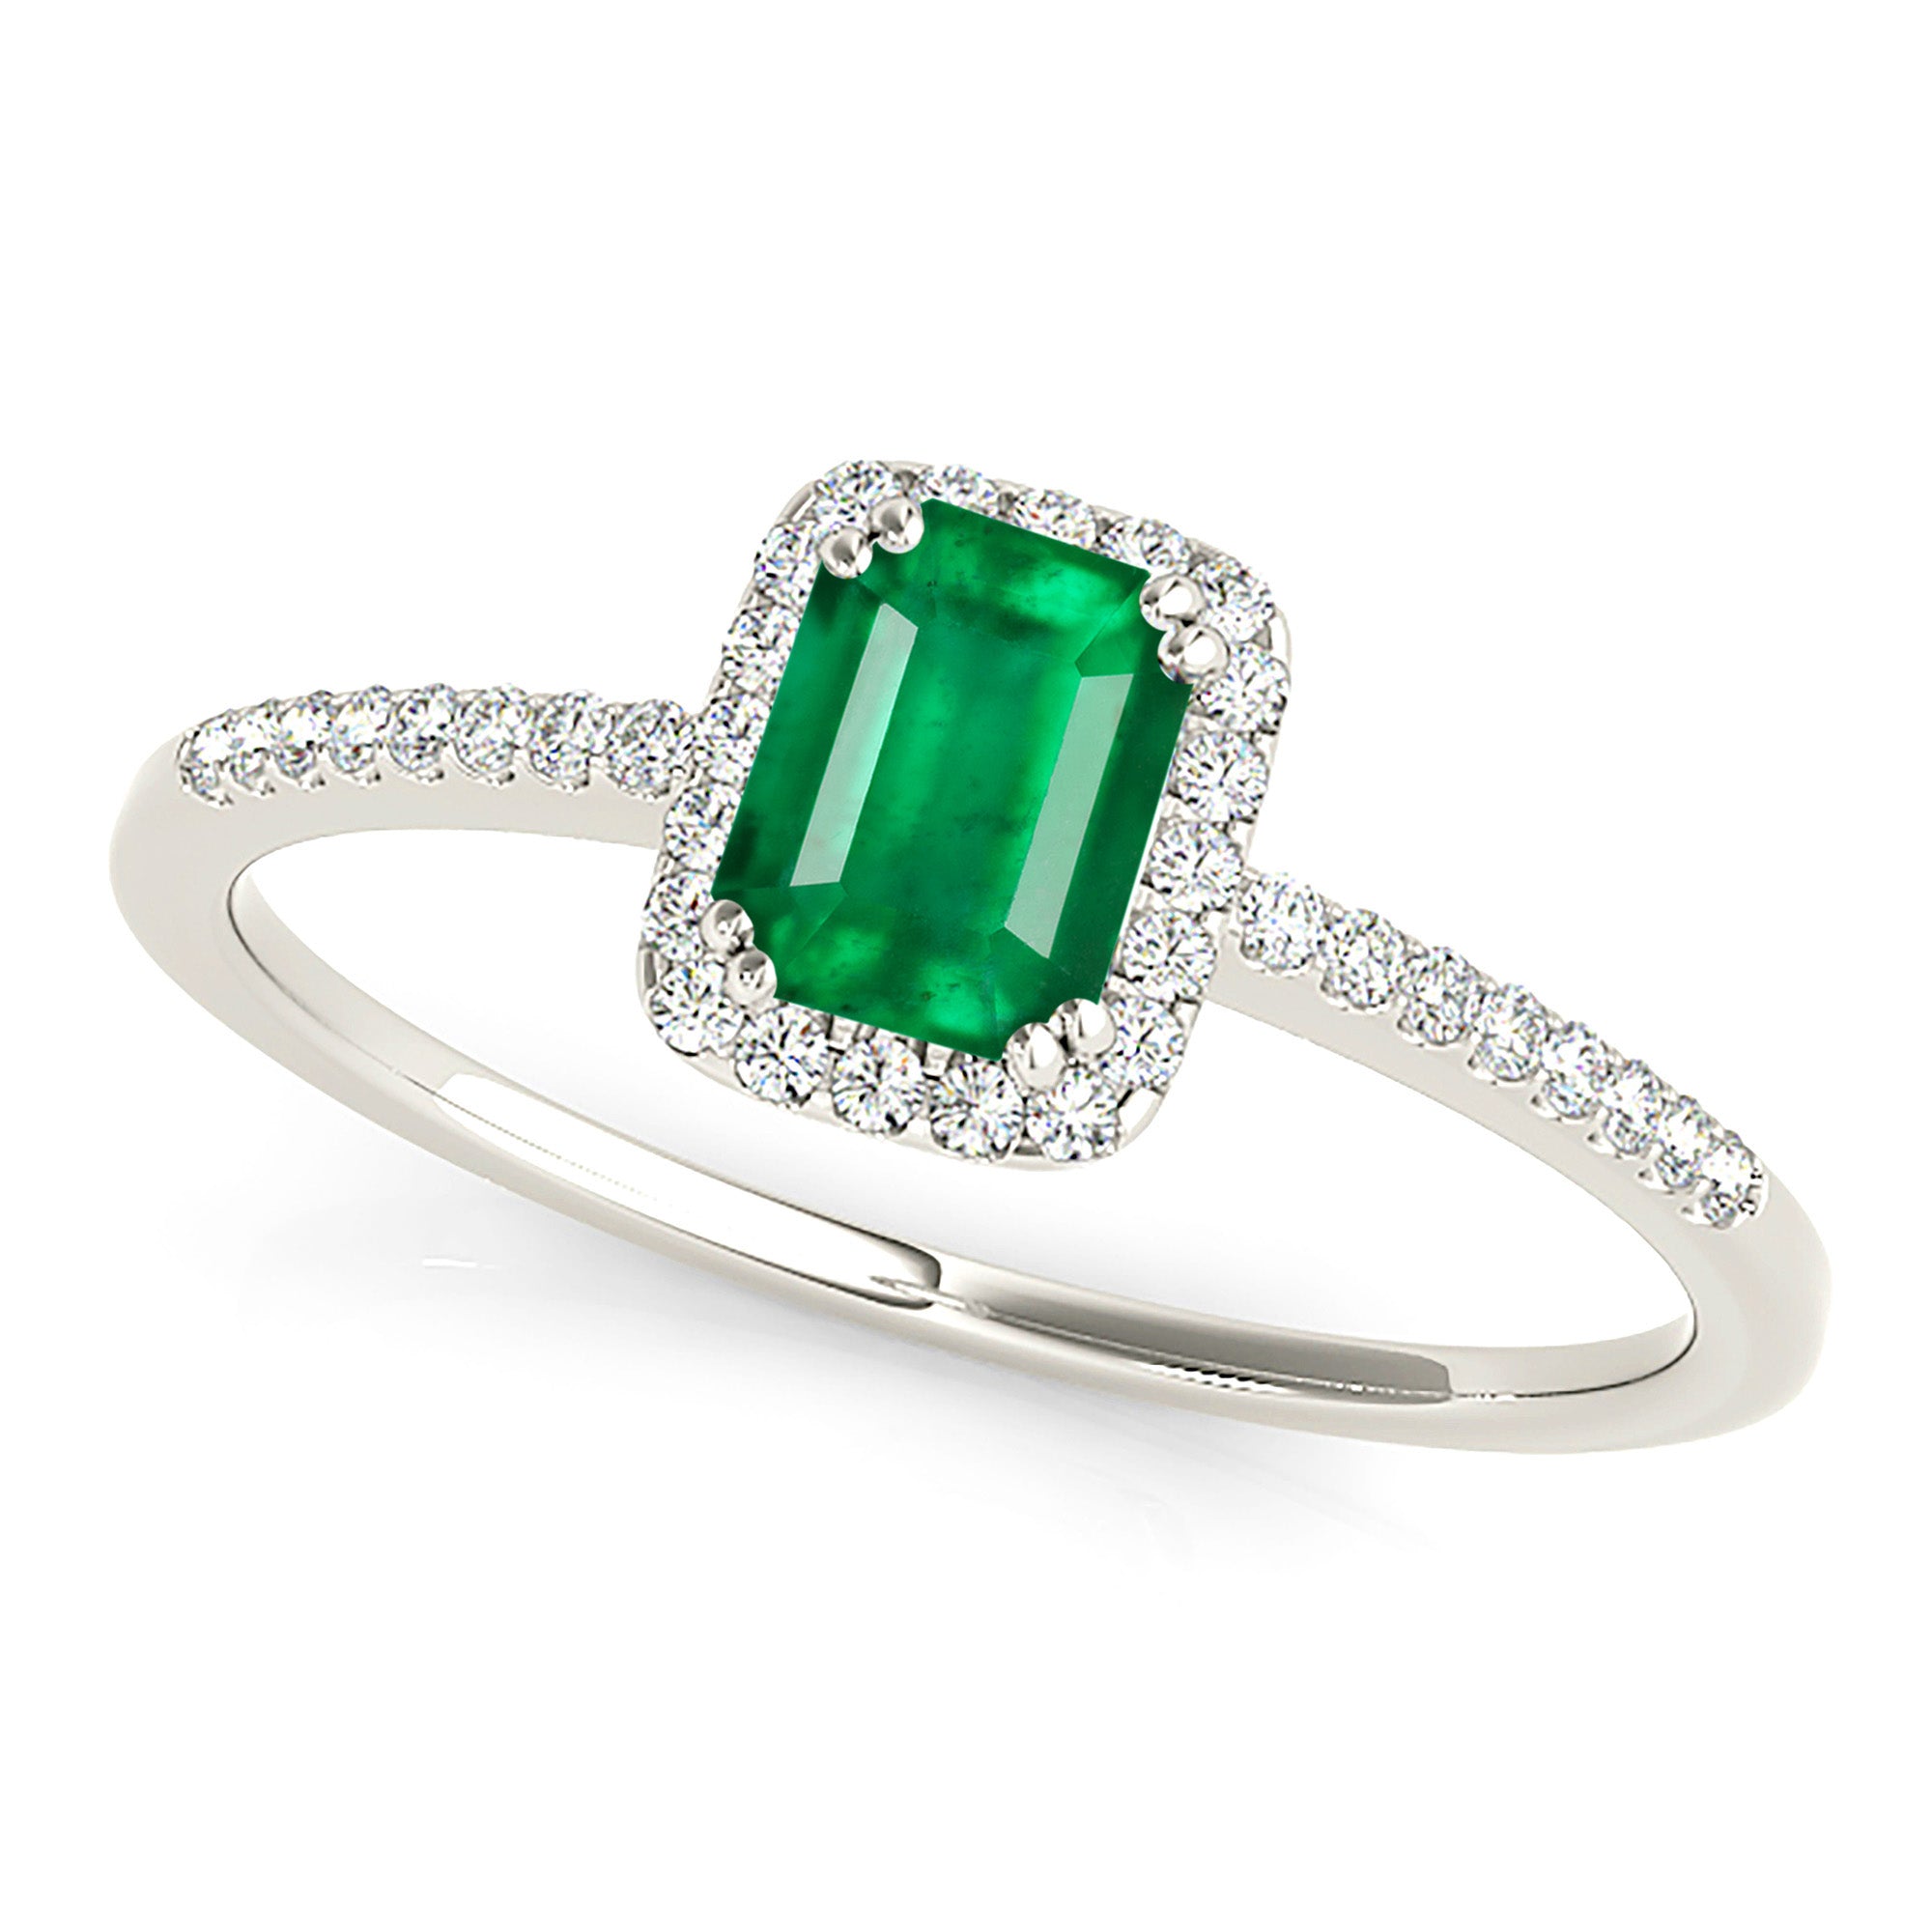 0.65 ct. Genuine Emerald Ring With 0.20 ctw. Diamond Halo and Diamond Delicate Shank-in 14K/18K White, Yellow, Rose Gold and Platinum - Christmas Jewelry Gift -VIRABYANI